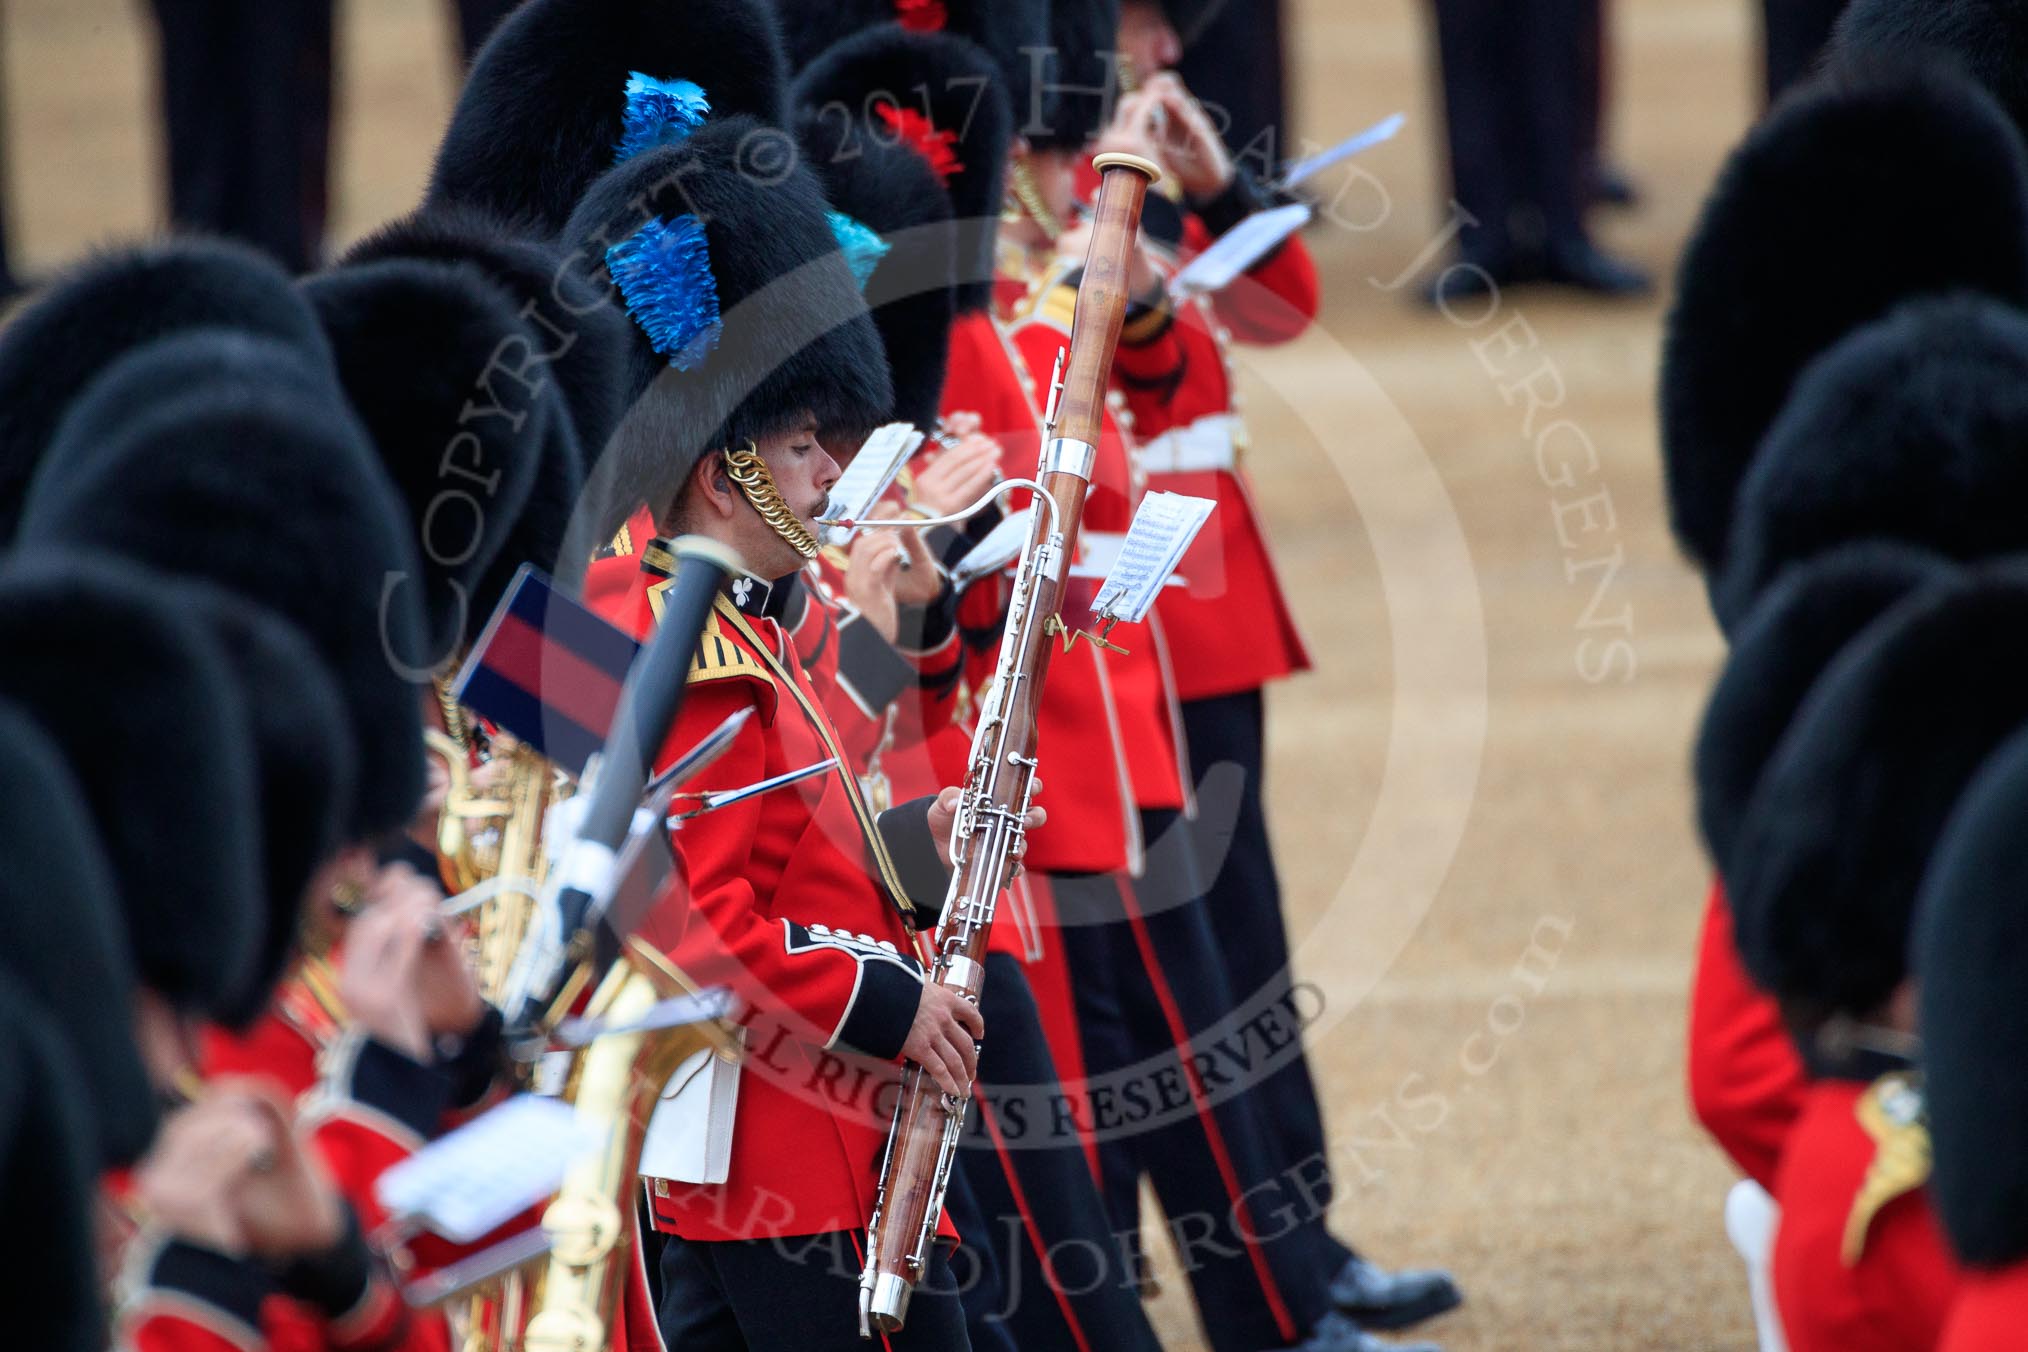 during The Colonel's Review {iptcyear4} (final rehearsal for Trooping the Colour, The Queen's Birthday Parade)  at Horse Guards Parade, Westminster, London, 2 June 2018, 11:09.